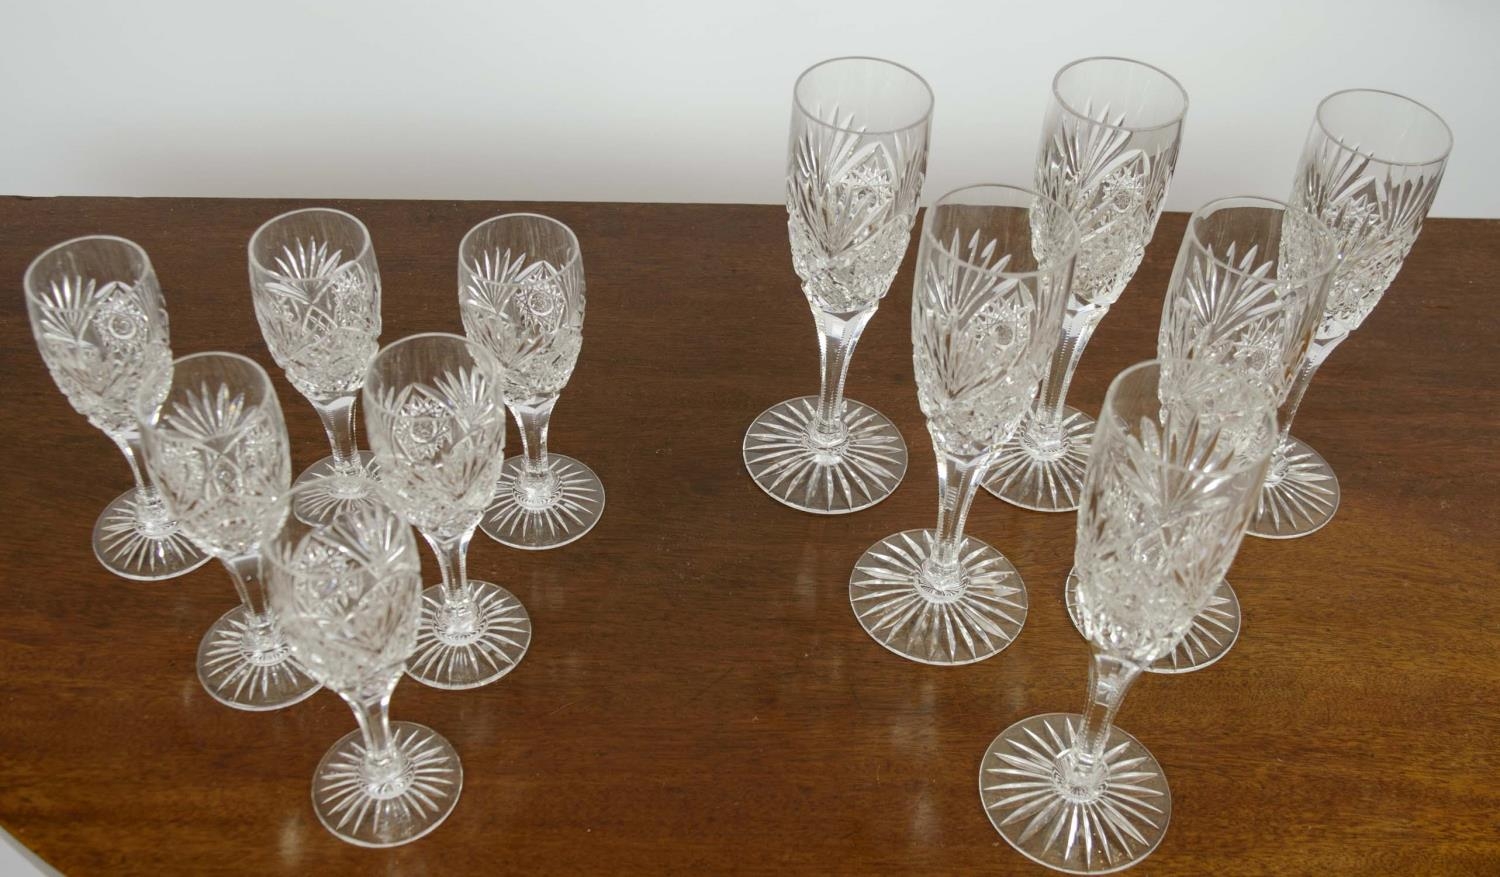 CHAMPAGNE FLUTES, a set of six, cut crystal glass along with six matching dessert wine glasses. (12) - Image 4 of 8